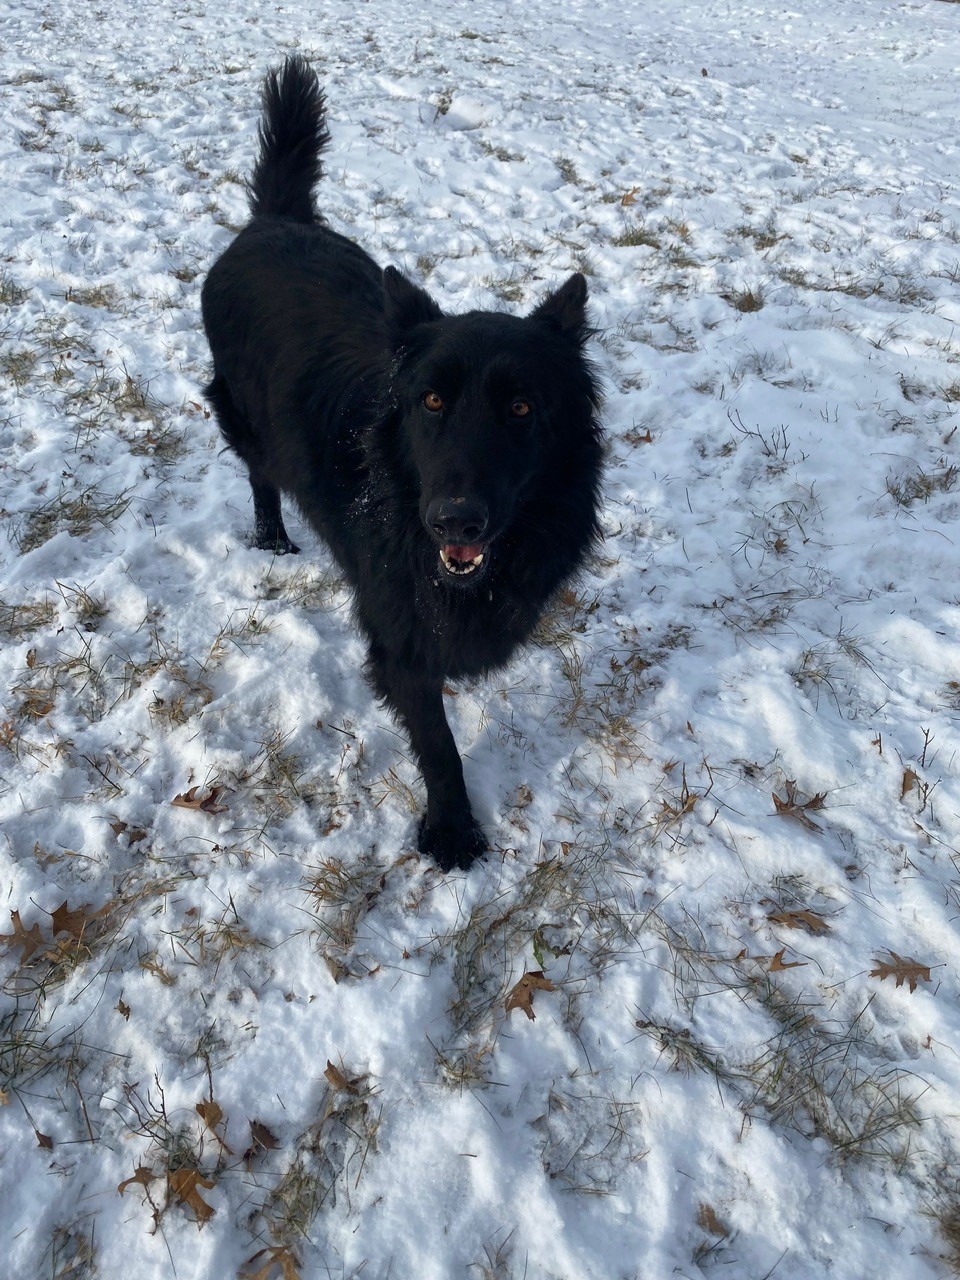 Peter loves running in the snow